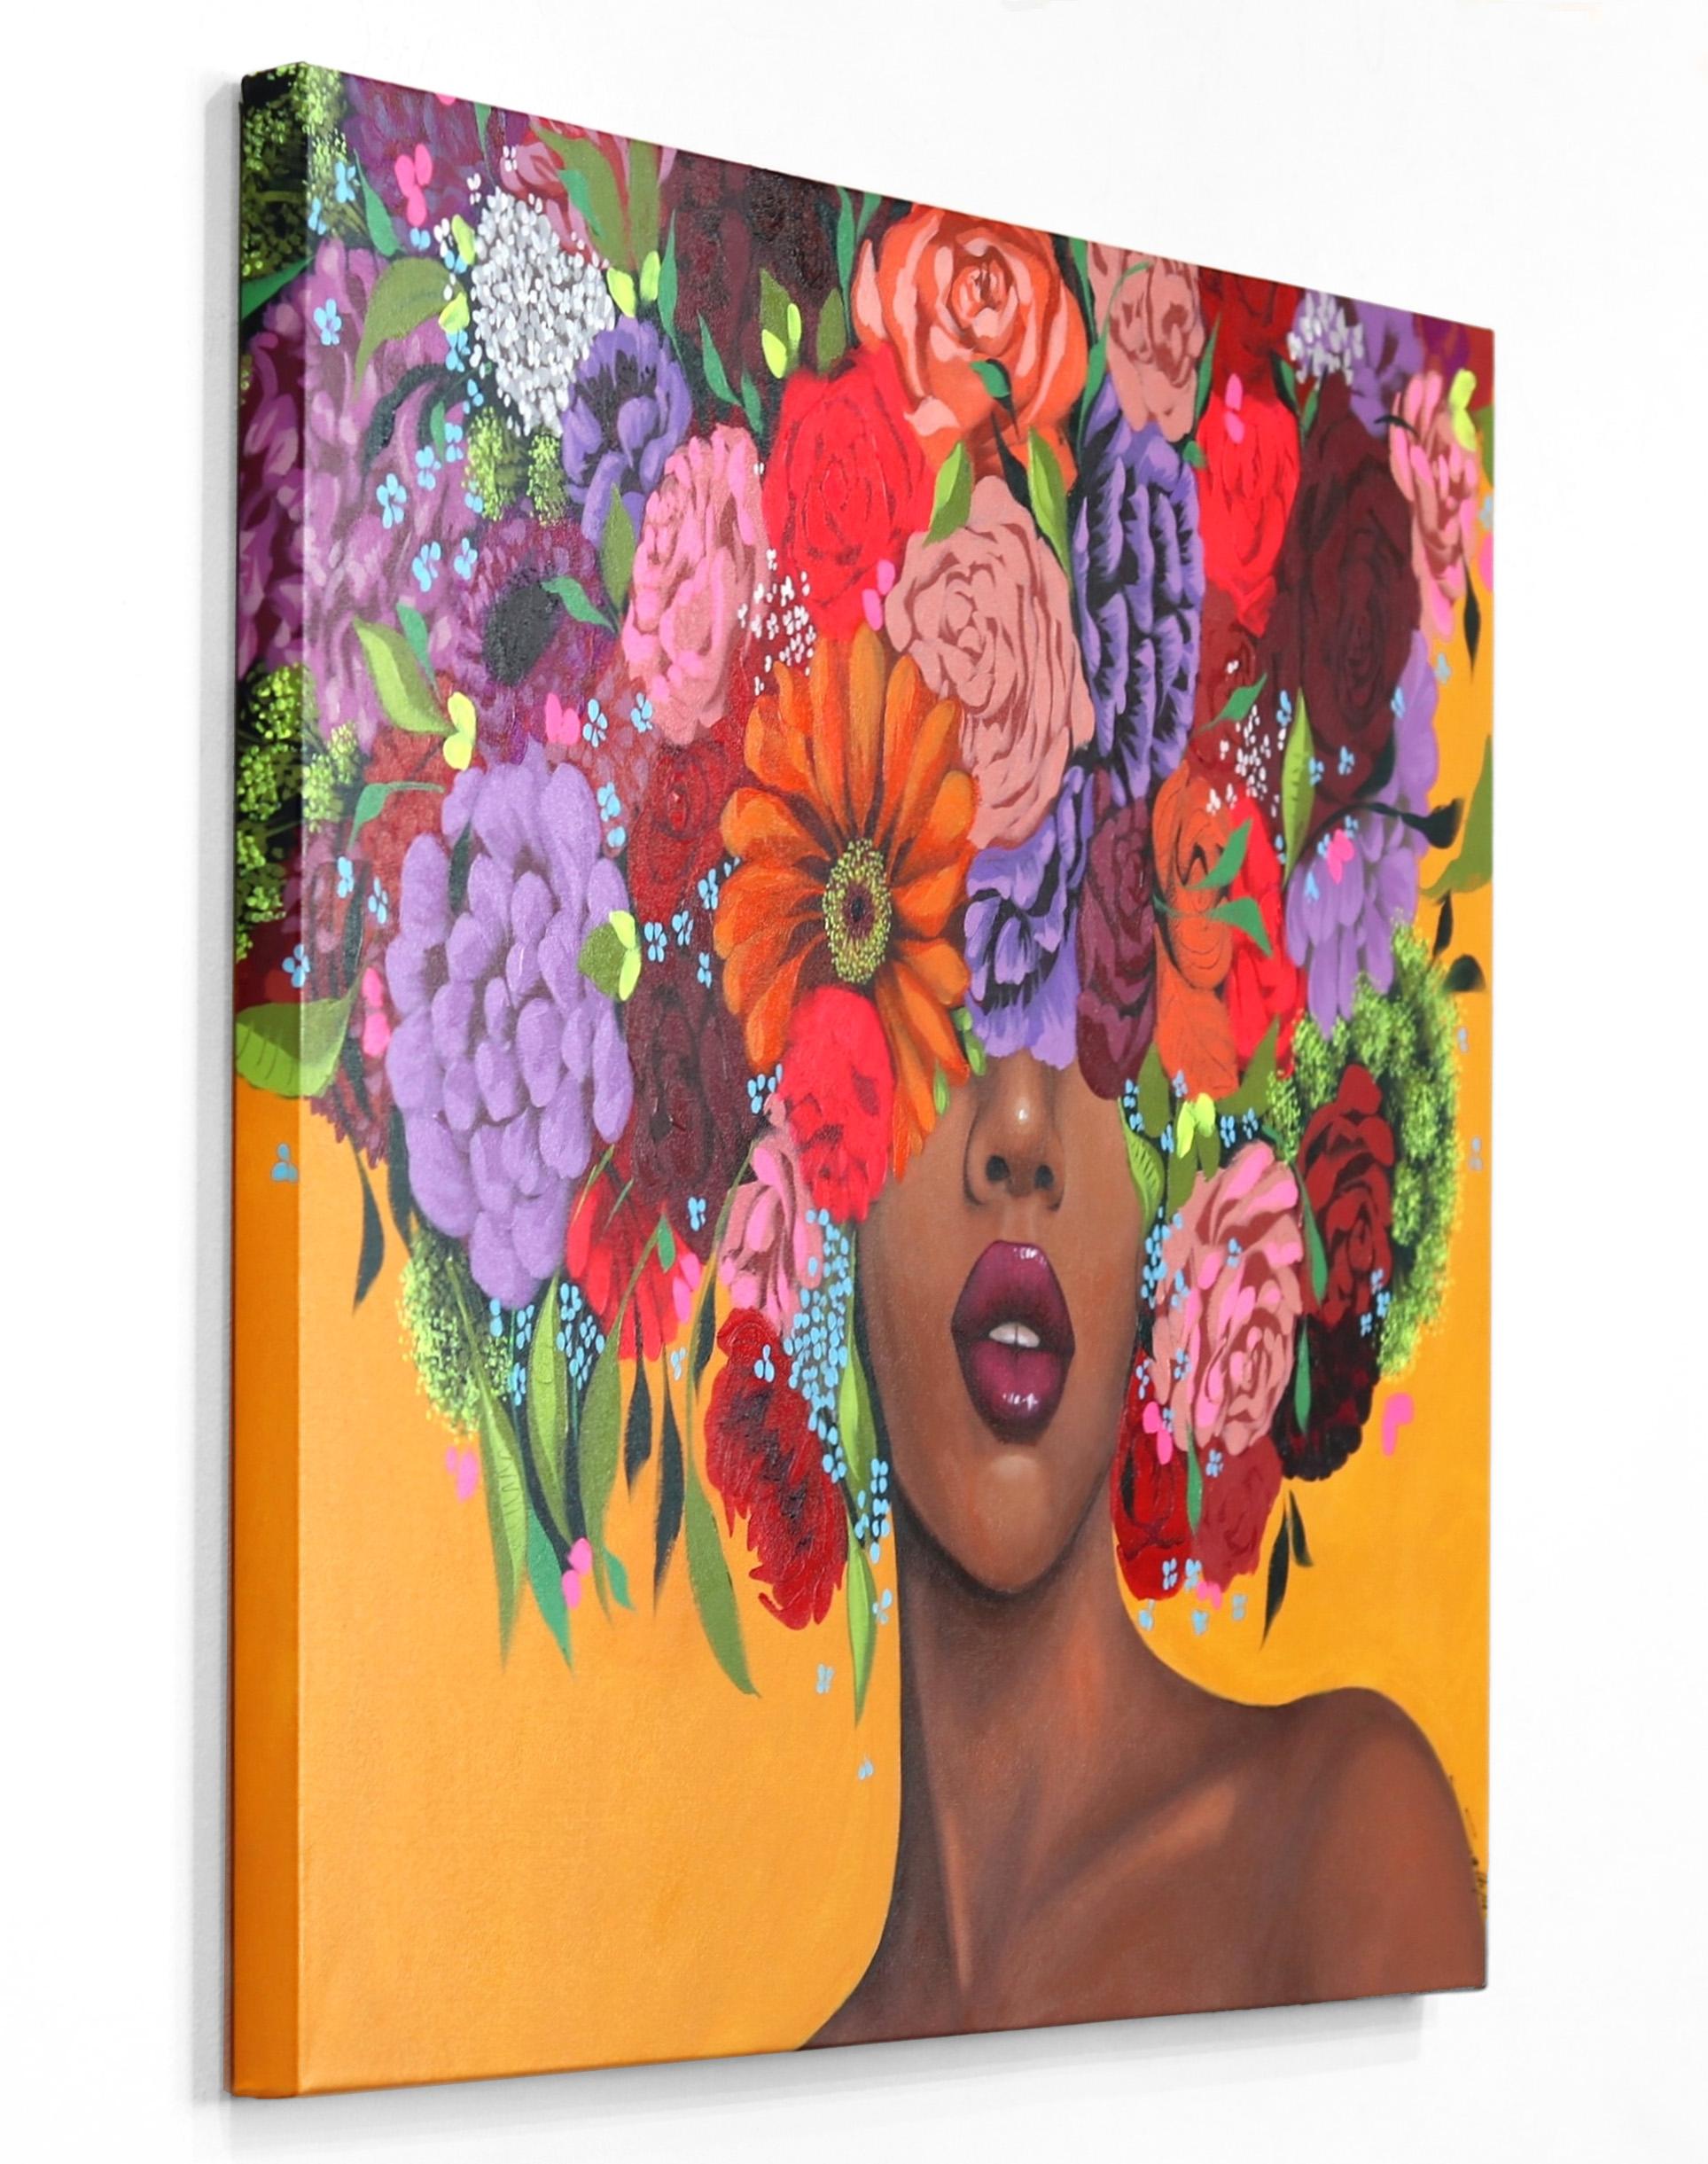 As your gaze lingers on one of Sally K’s paintings, you notice how Sally’s brush strokes add playfulness and life to the canvas, incorporating unexpected images and shapes of flowers, or abstract color combinations to convey the vibrant beauty of a